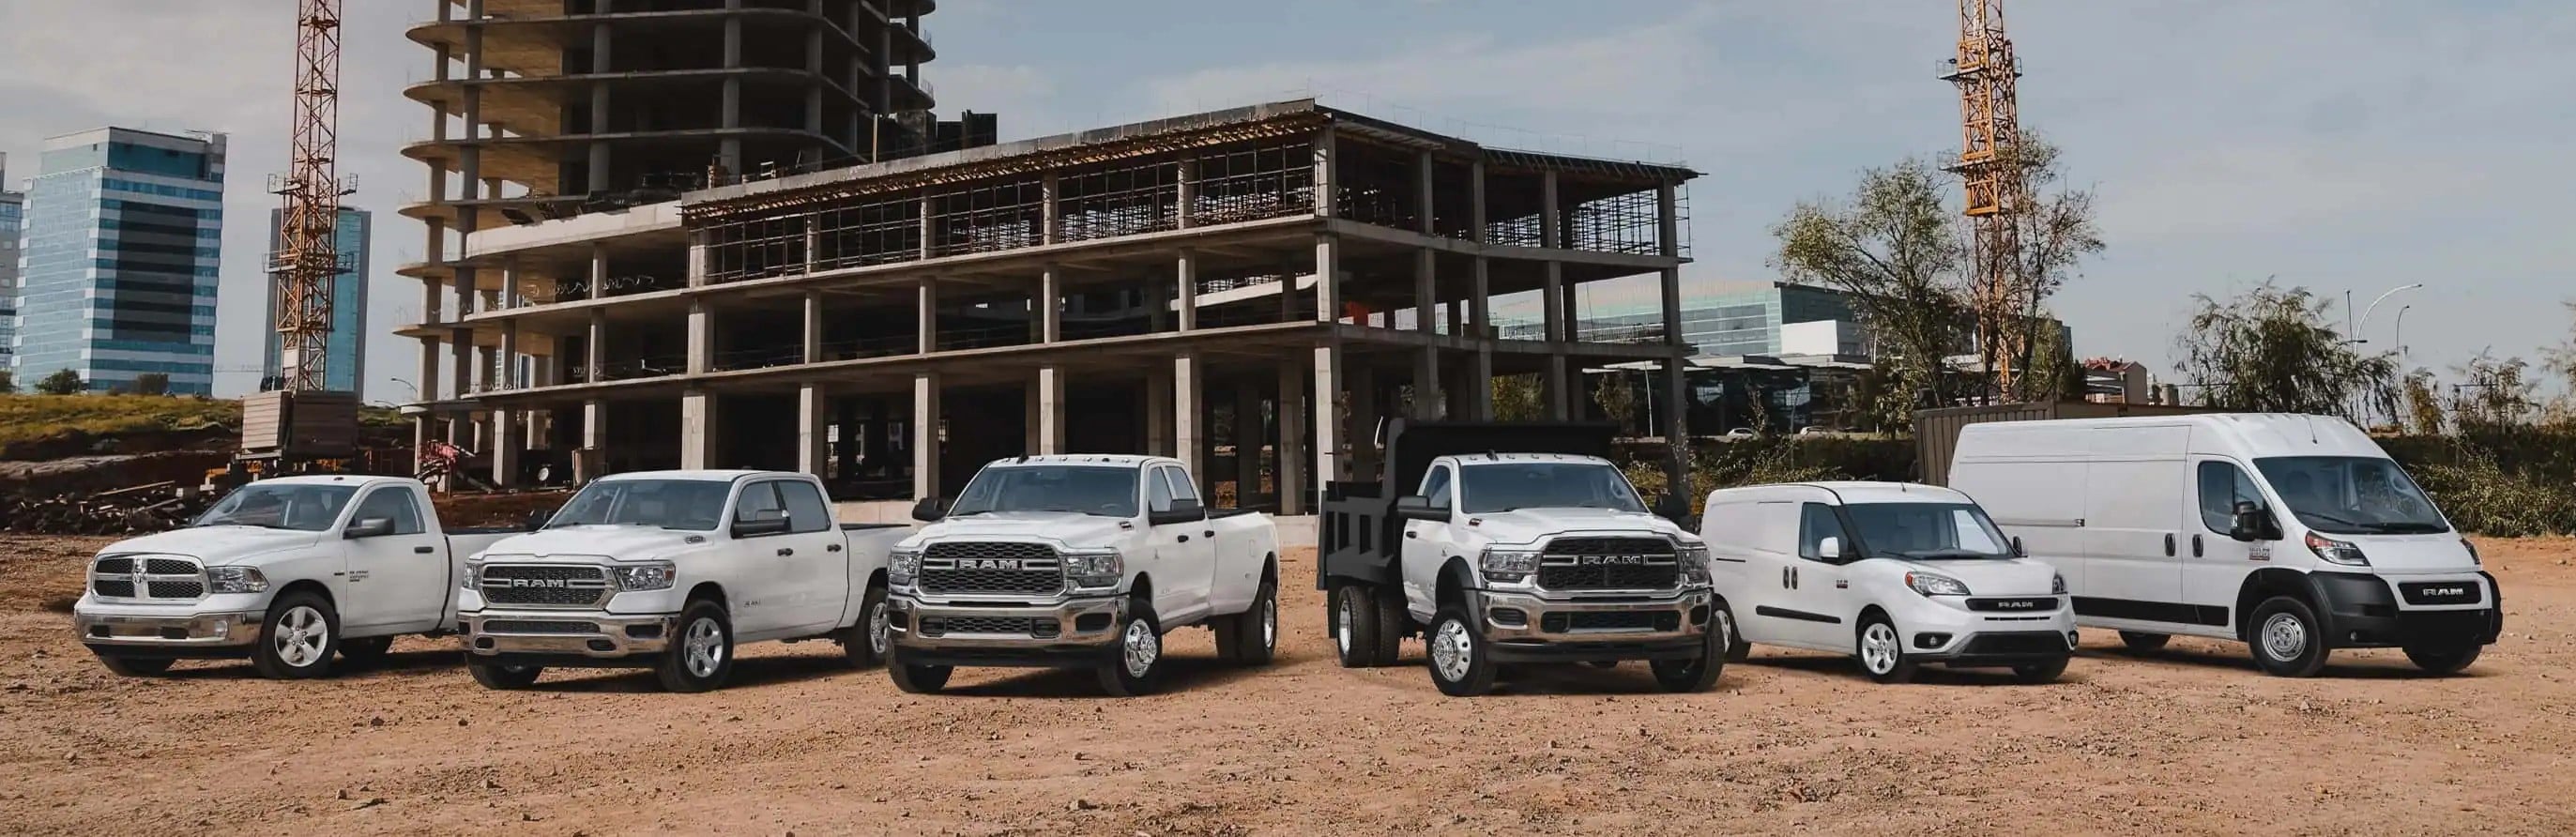 5 Ram vehicles in front of a construction zone